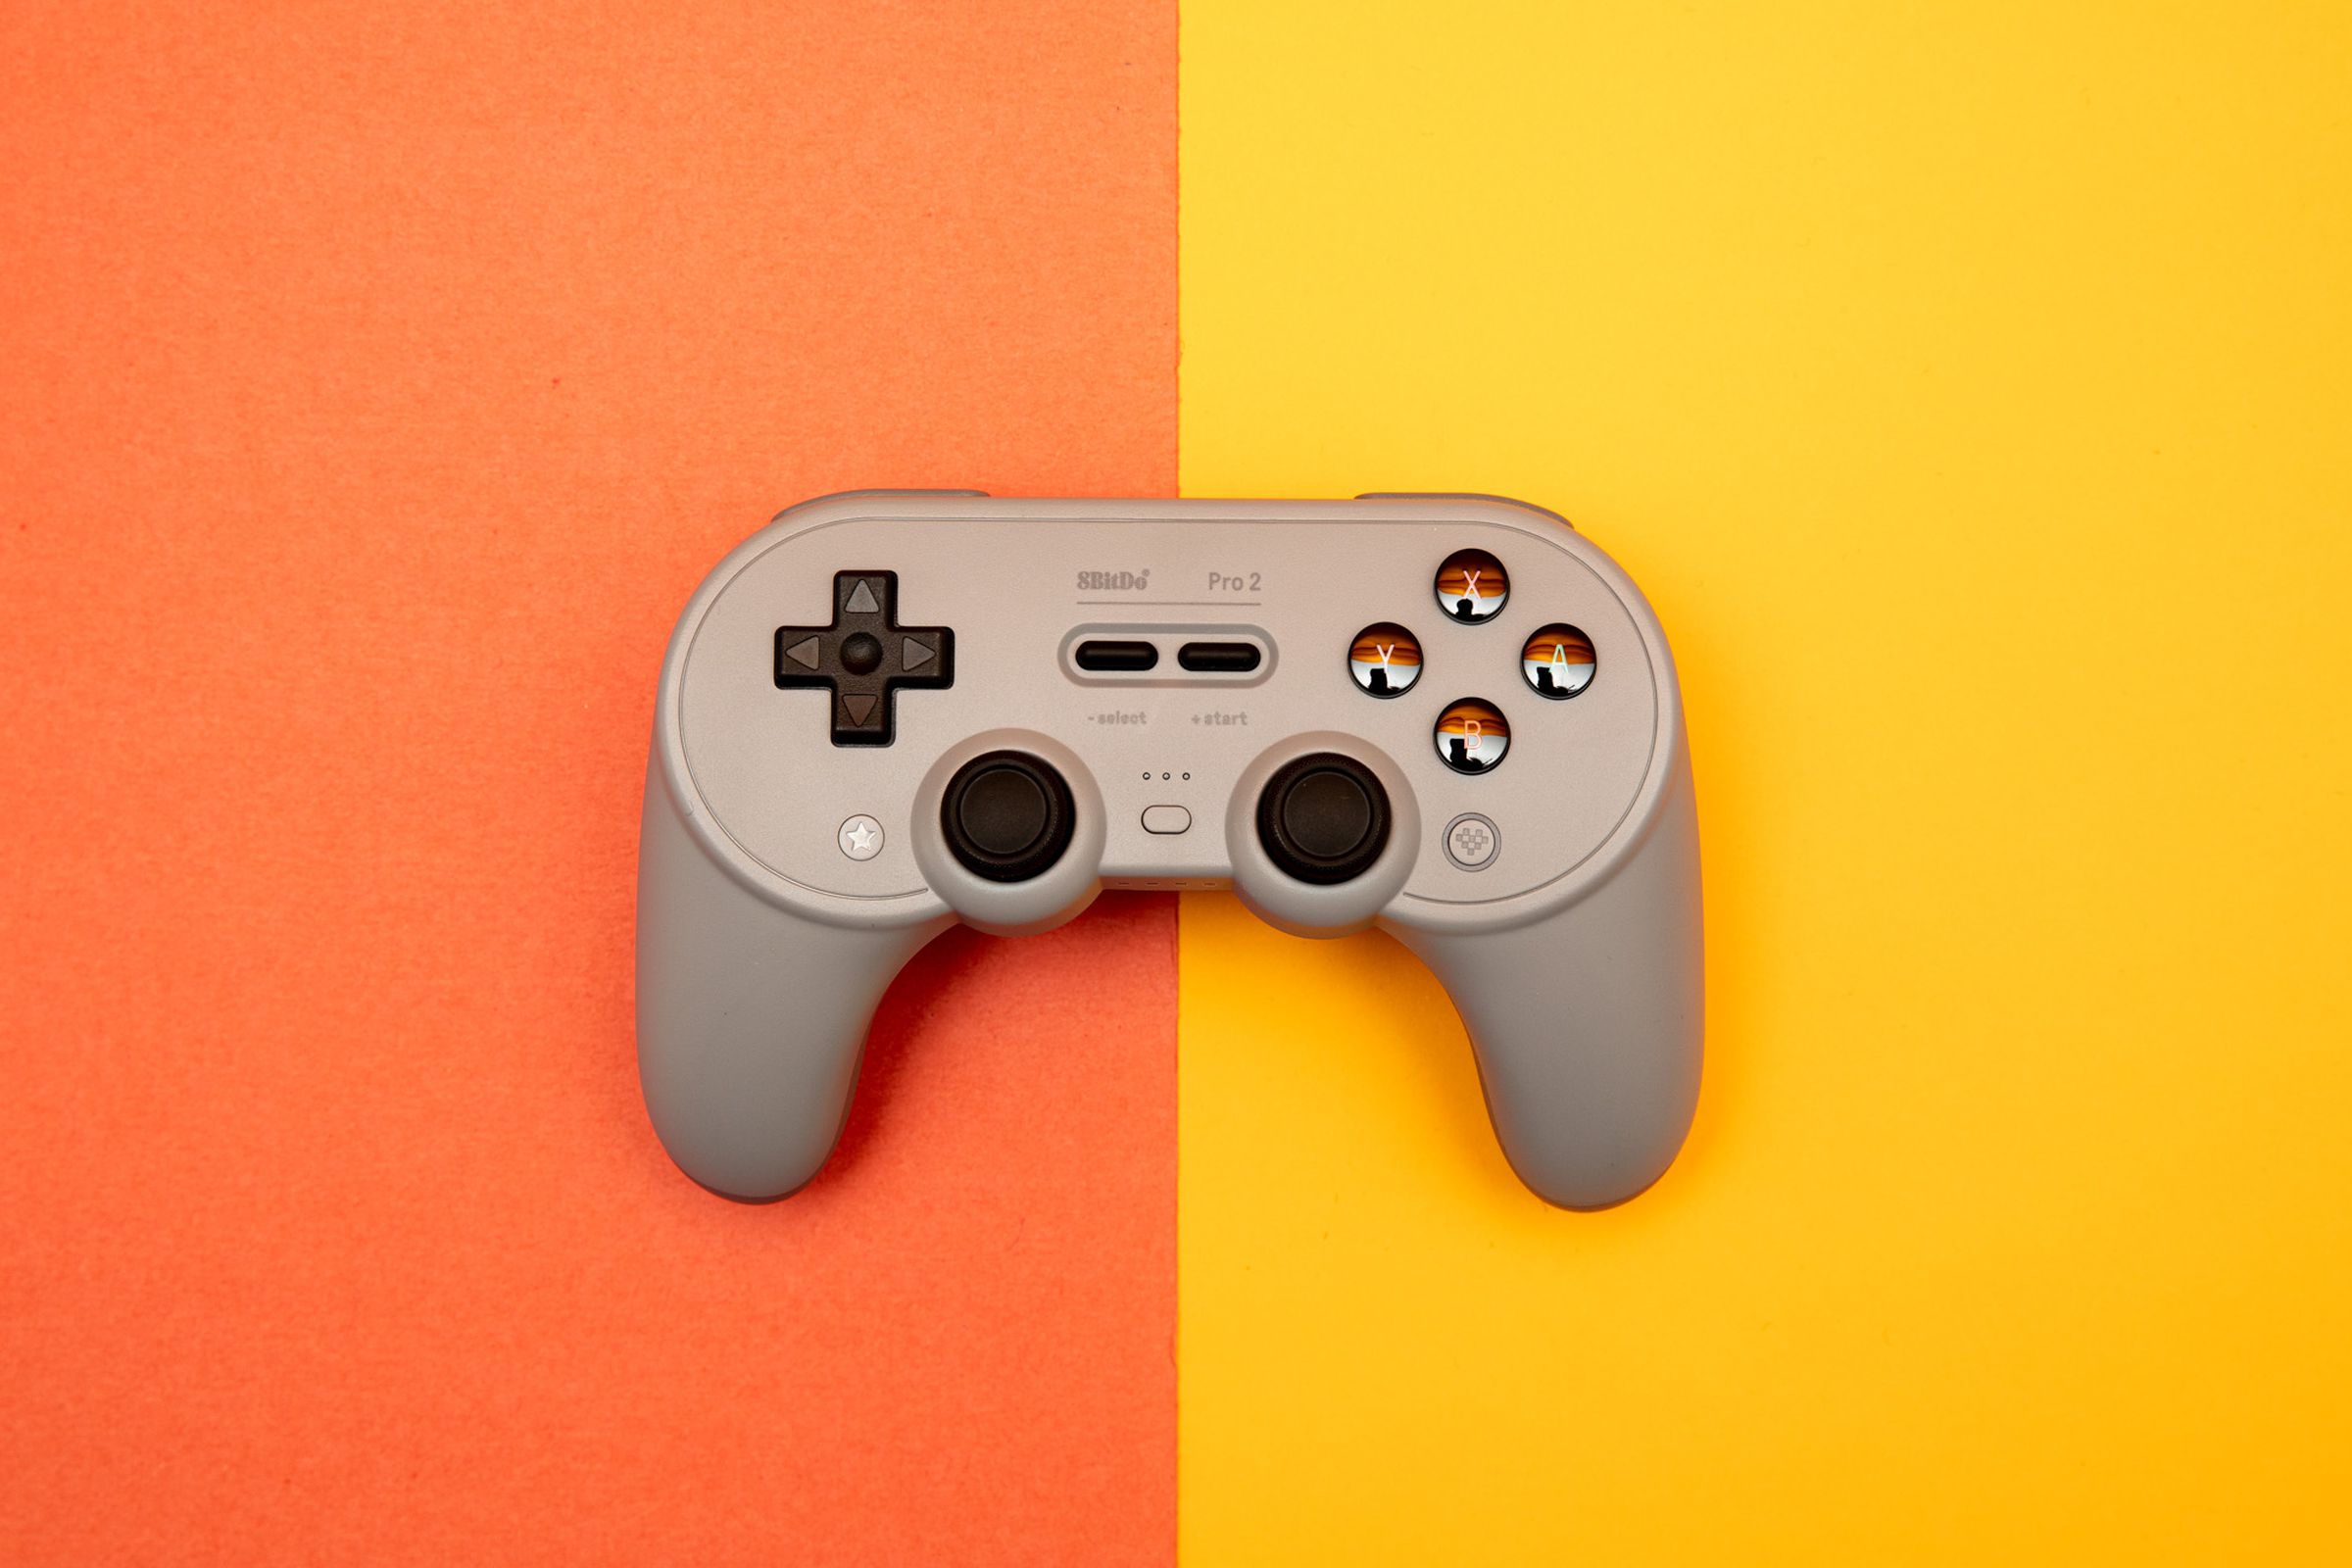 The 8BitDo Pro 2 wireless controller for the Nintendo Switch and other platforms sitting on a two-toned backdrop.